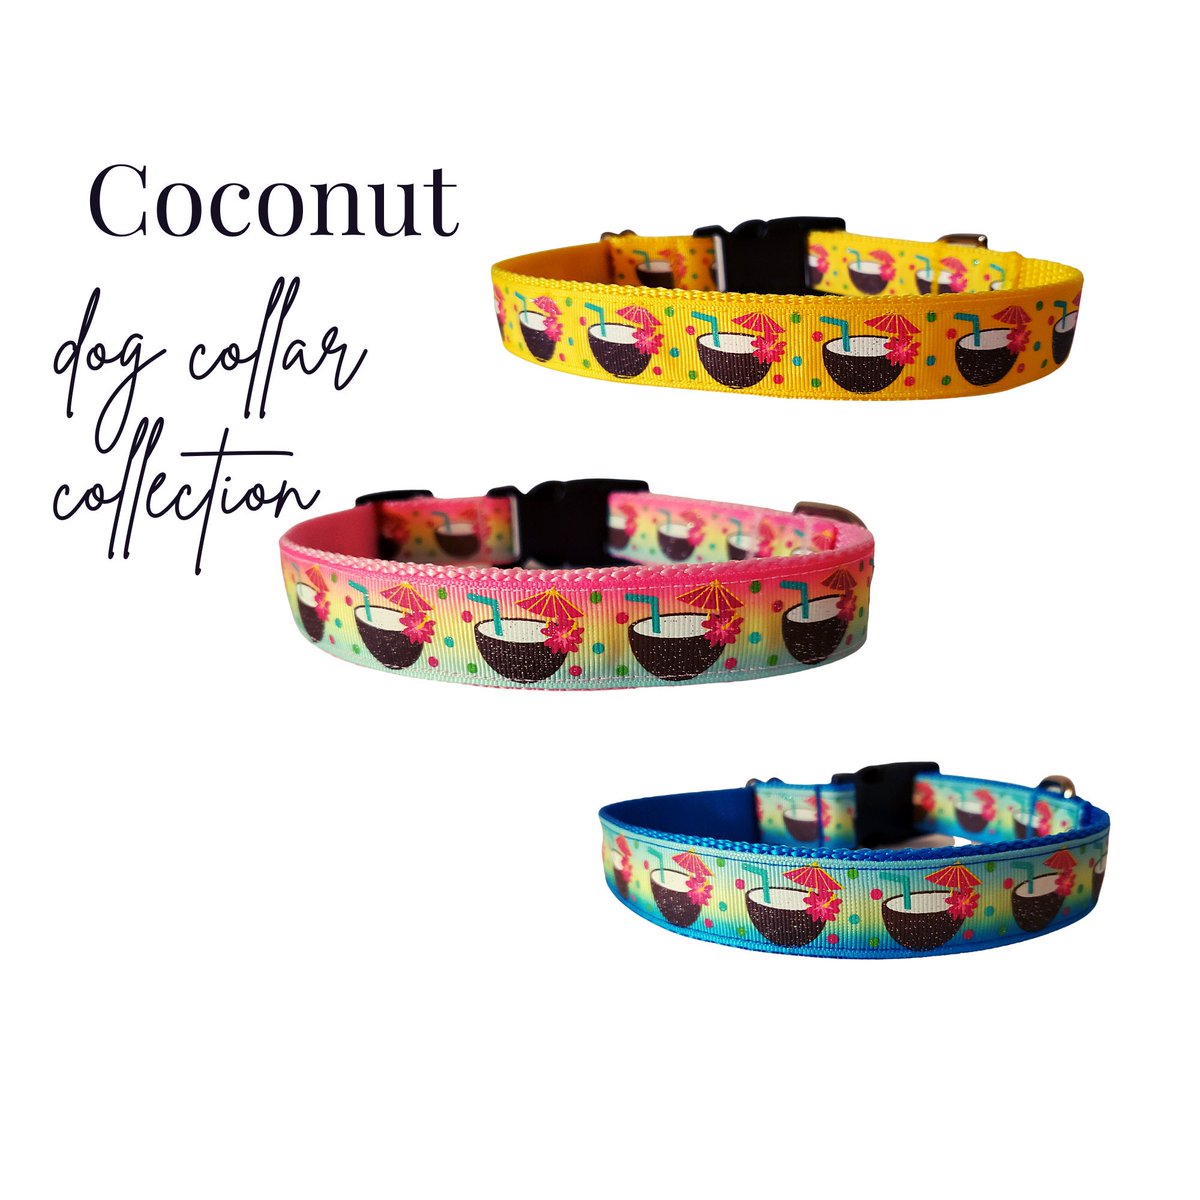 Coconut drinks themed dog collar. If you love #coconuts and #dogs, this collar allows you to bring them both together. #dogsoftwitter #craftbizparty #HandmadeHour #etsyhandmade #inbizhour designsbycristal.etsy.com/listing/118297…